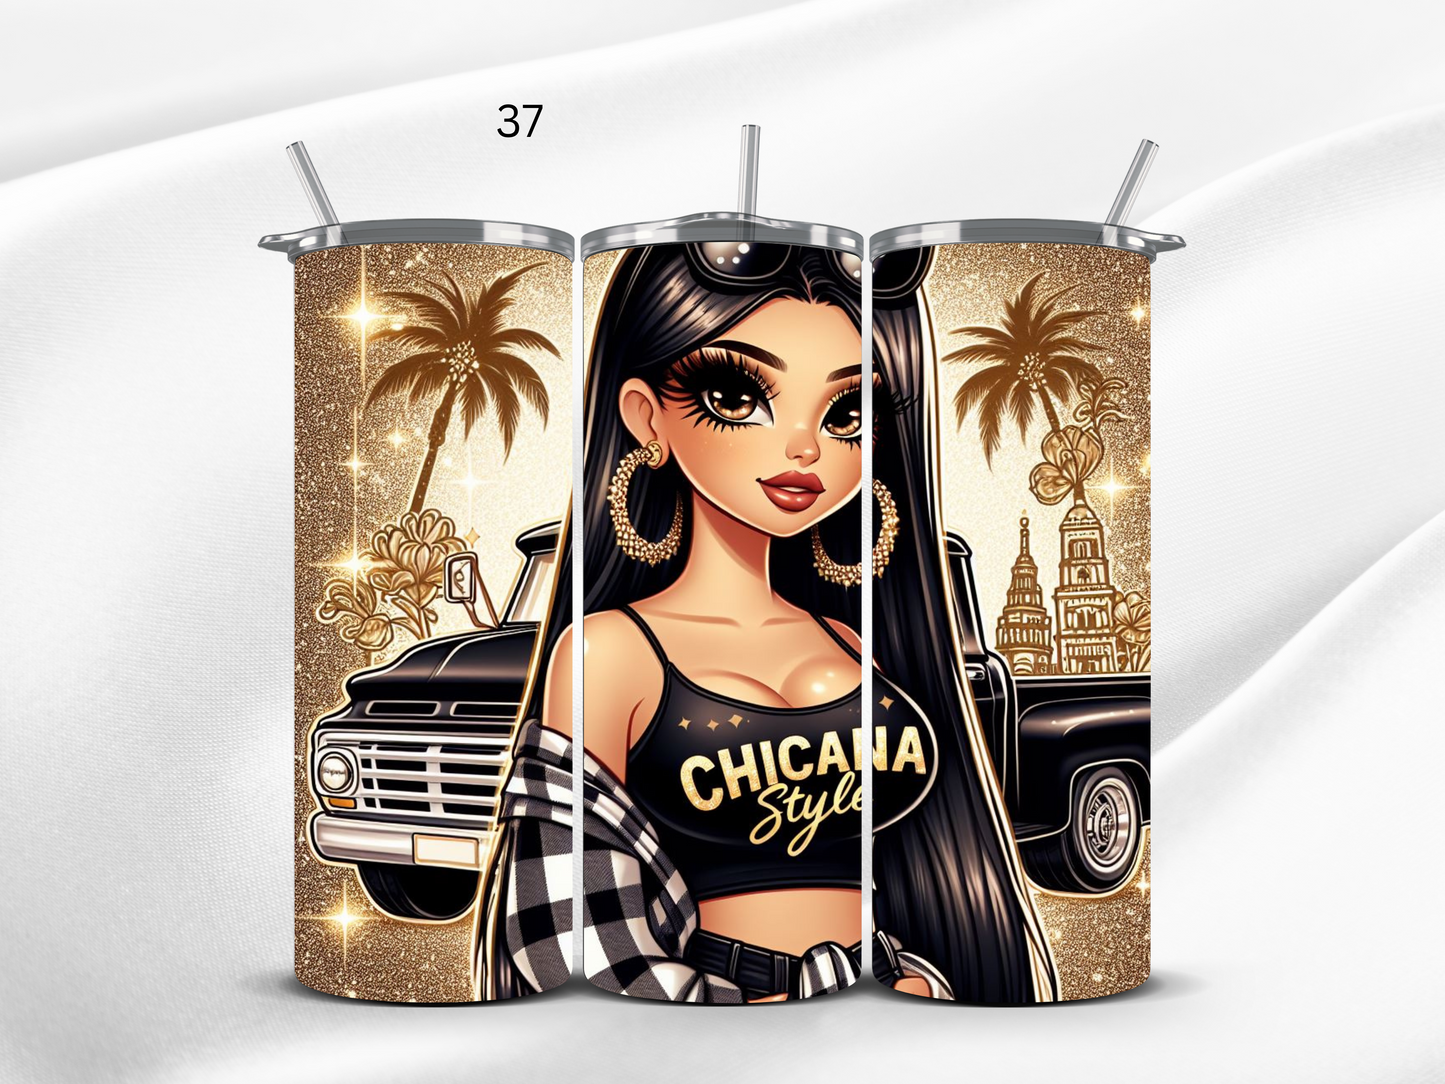 Chicana Style (options #'s 26-50)